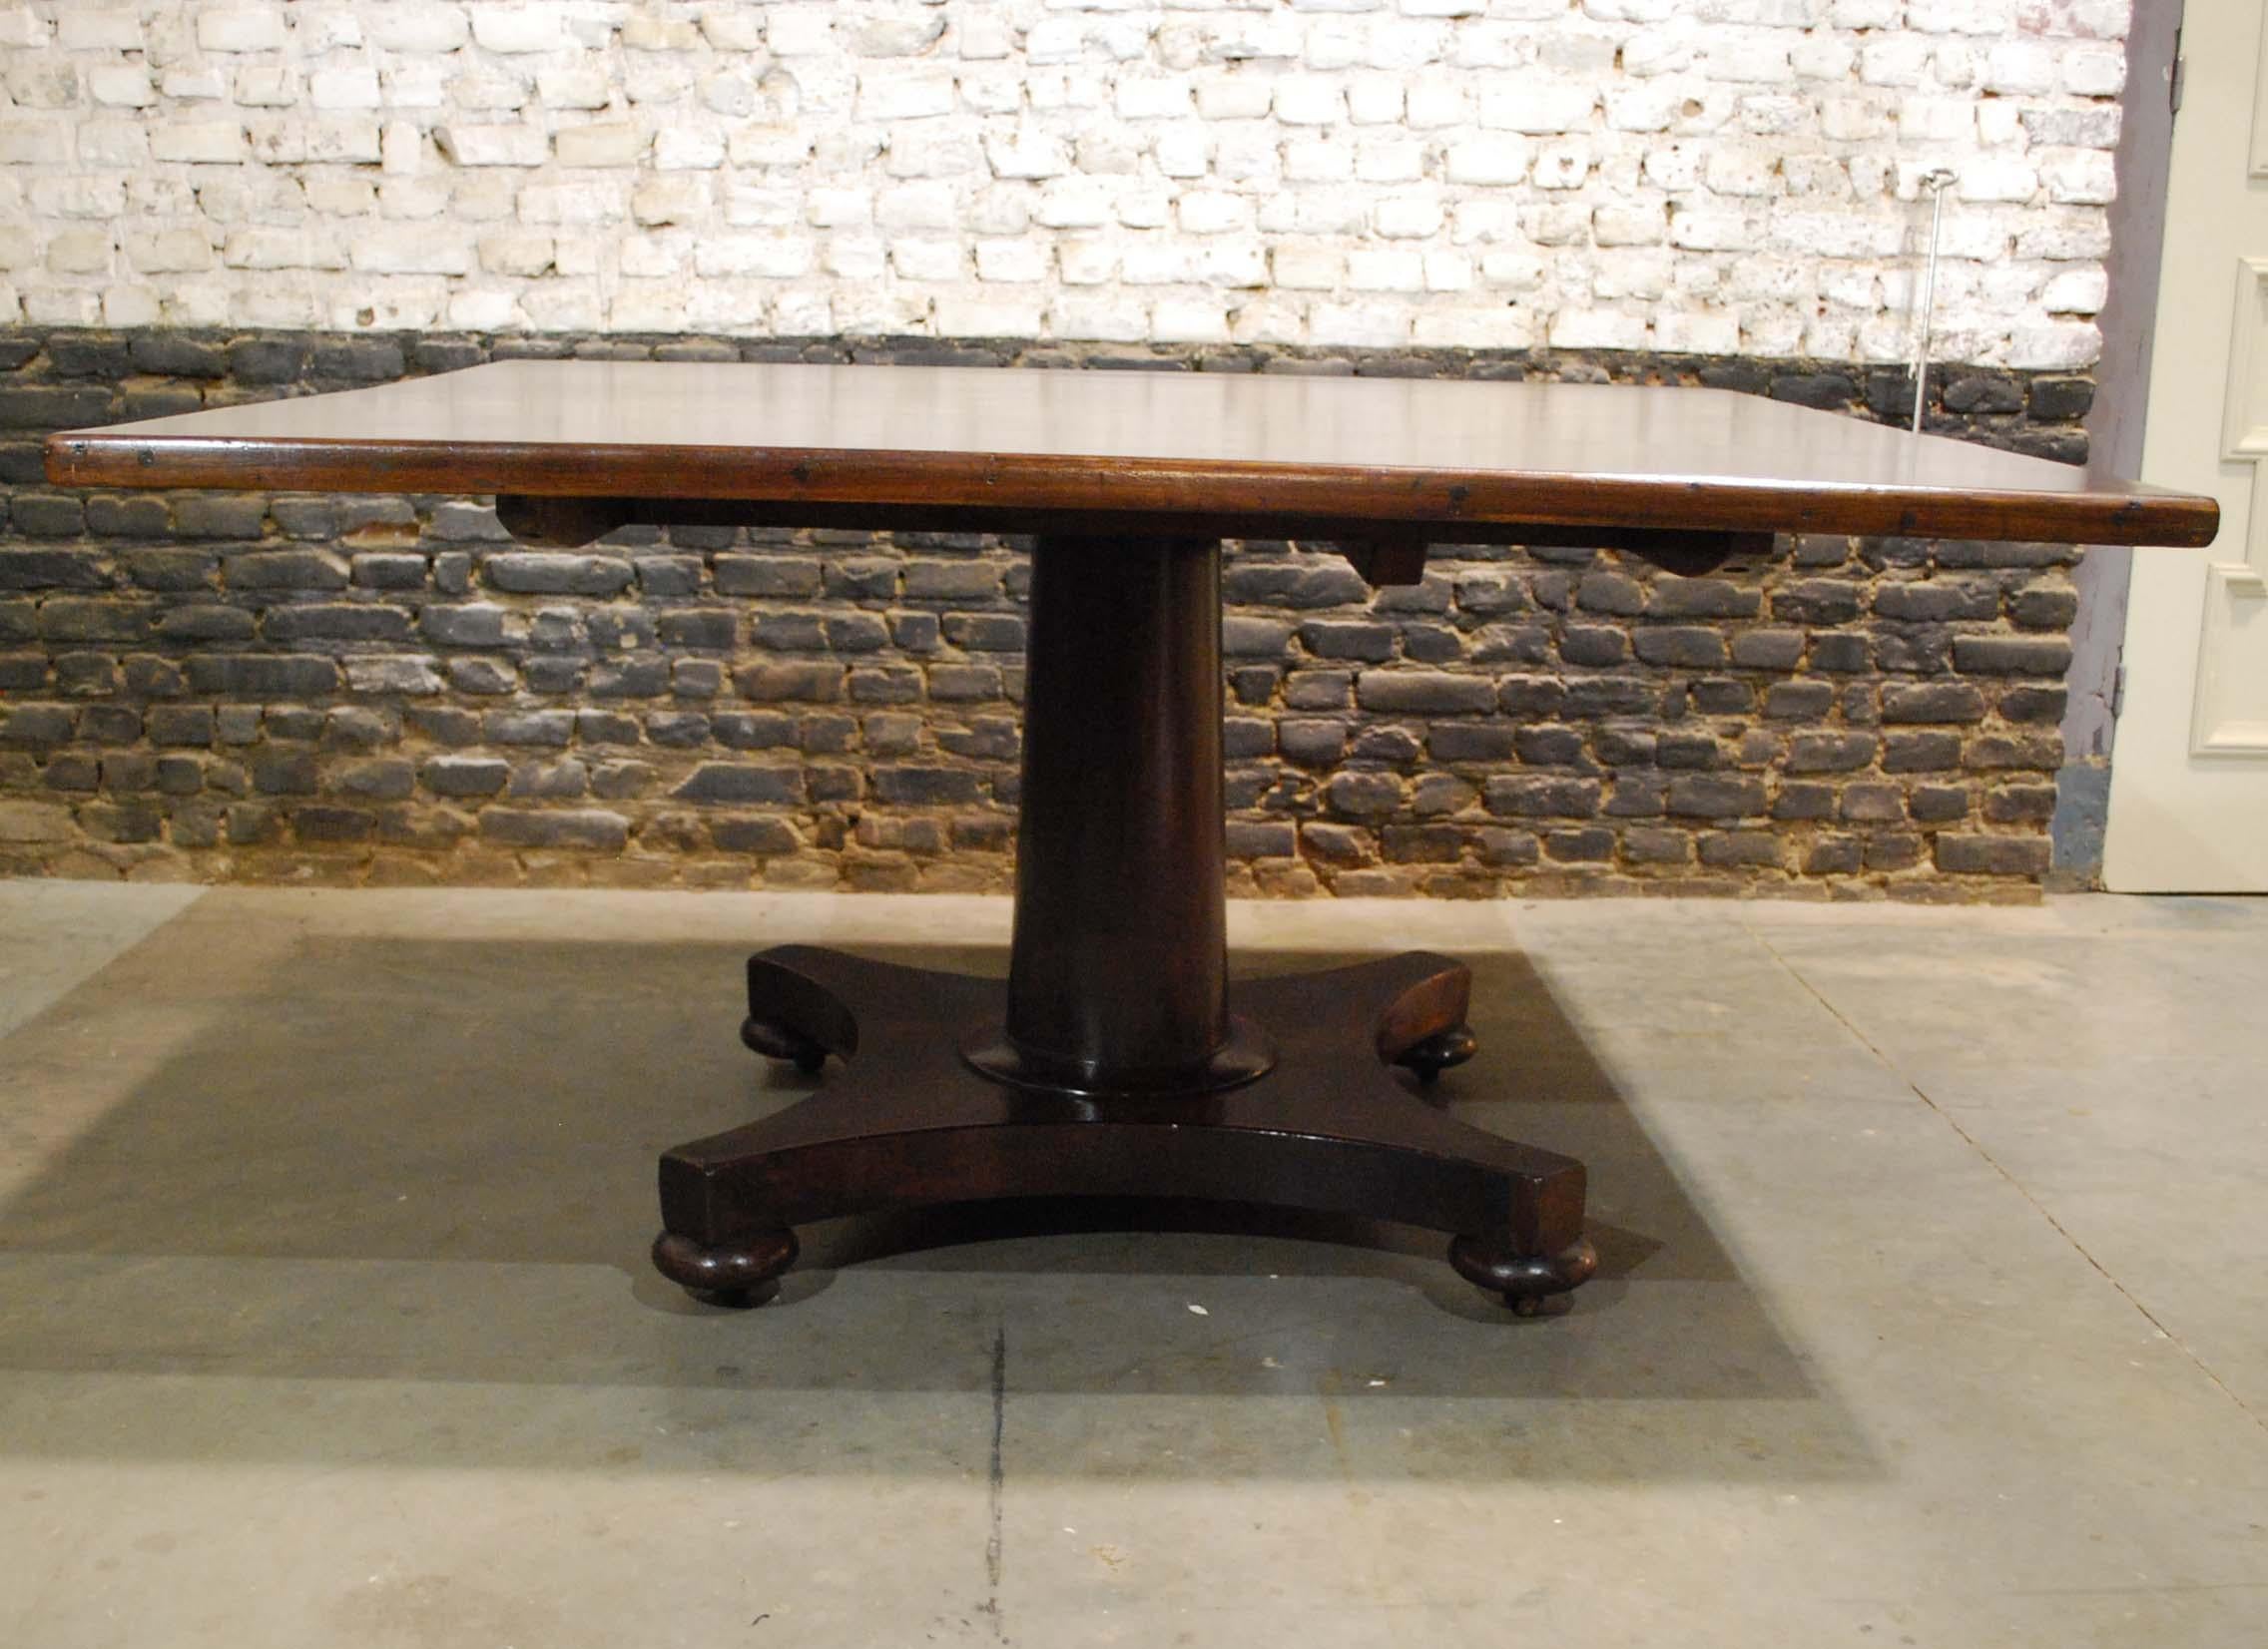 This beautiful large square tilt-top table was made in England, circa 1850. The top is made in genuine mahogany with vertical grain. The top is 1.38 inches thick and is 55.71 by 52.36 inches. The top Is beautifully polished and shows a warm aged